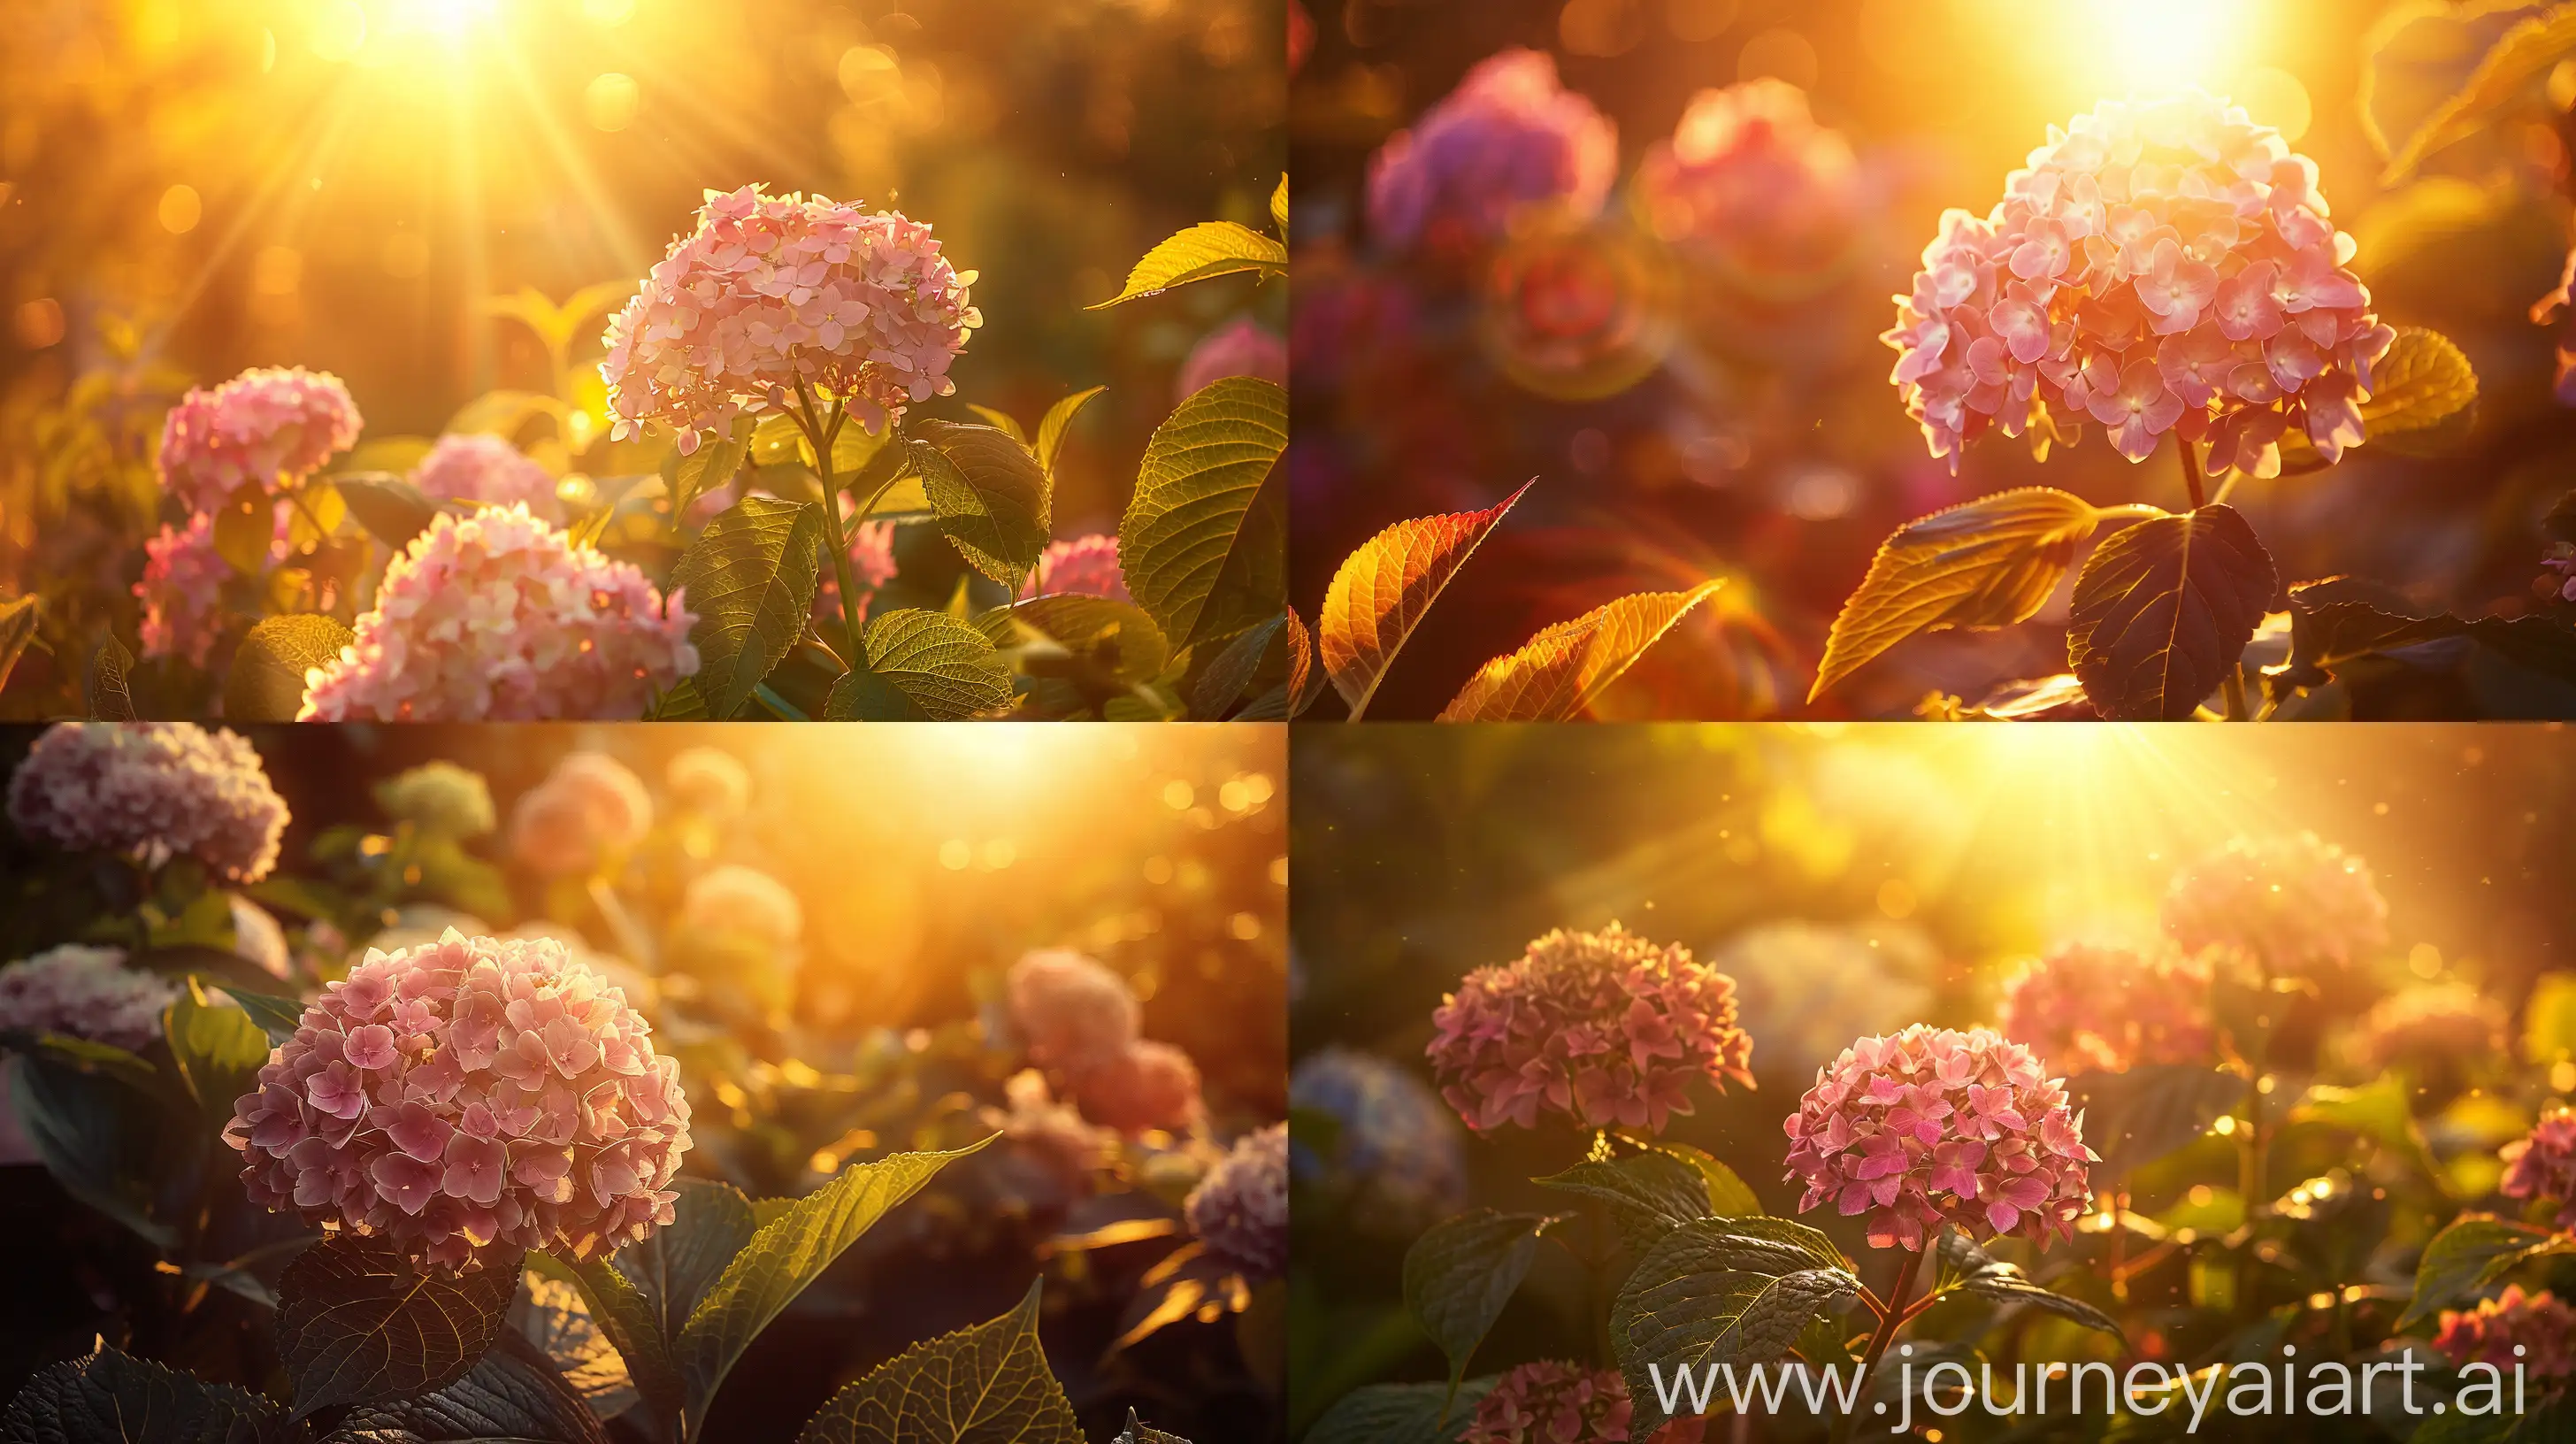 High detailed photo capturing a Hydrangea, Masja. The sun, casting a warm, golden glow, bathes the scene in a serene ambiance, illuminating the intricate details of each element. The composition centers on a Hydrangea, Masja. This vivid little hydrangea makes a big impression, all while staying compact for the smallest of garden spaces. Produces armfuls of ball-shaped, pink-toned blooms against dark green, glossy leaves. Hardy, reliable and easy to grow.. The image evokes a sense of tranquility and natural beauty, inviting viewers to immerse themselves in the splendor of the landscape. --ar 16:9 